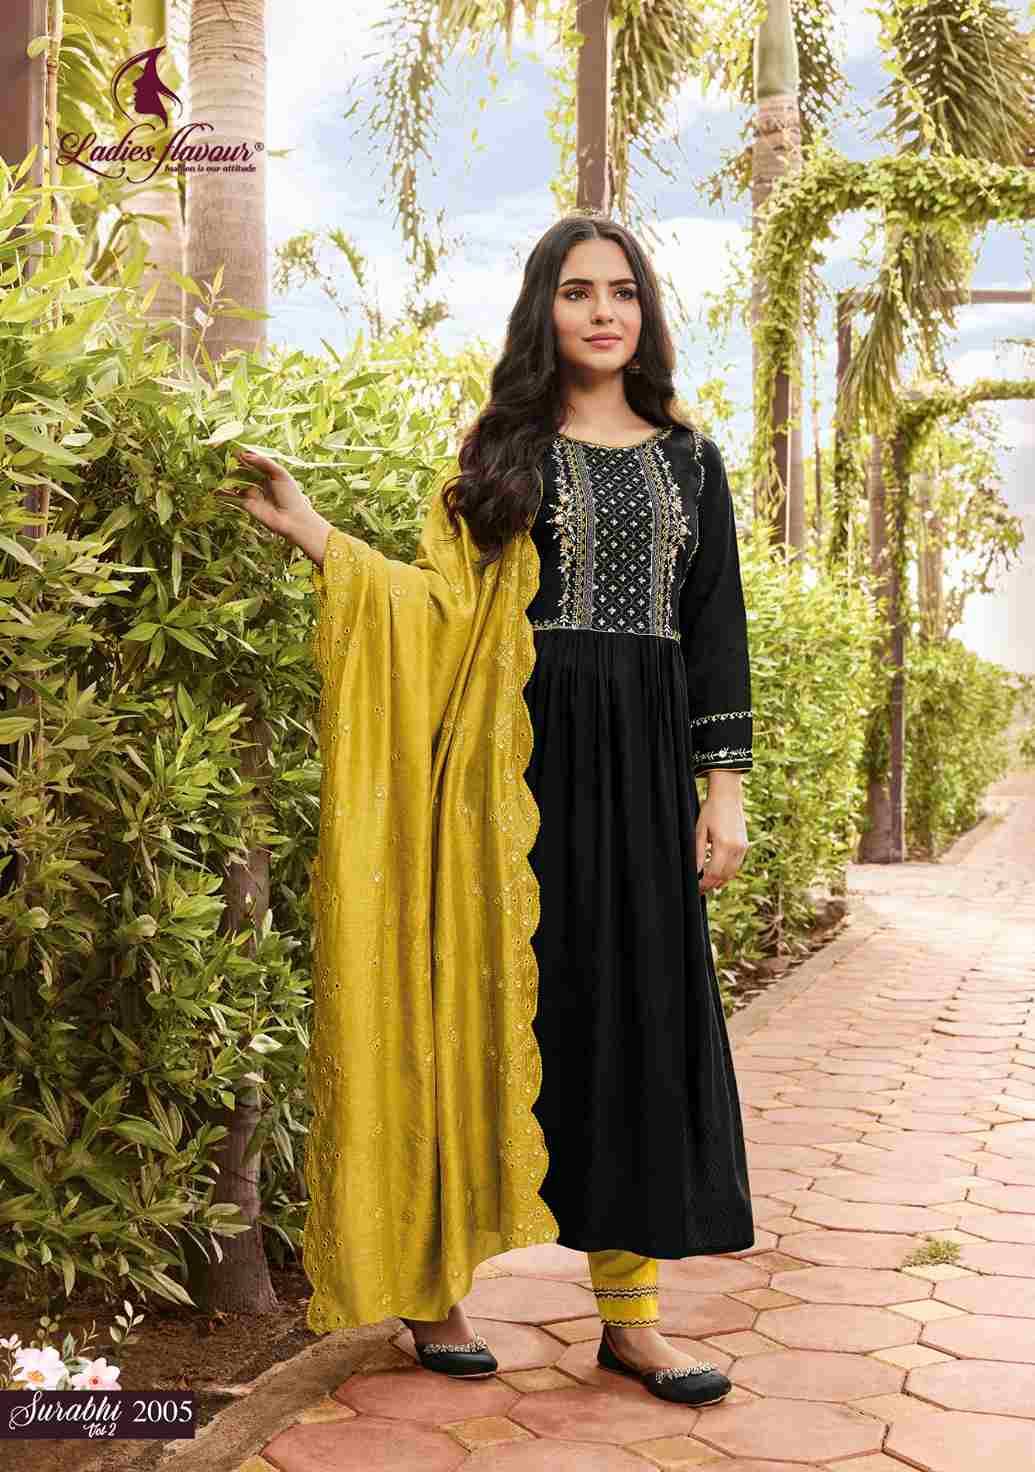 Surbhi Vol-2 By Ladies Flavour 2001 To 2006 Series Beautiful Festive Suits Colorful Stylish Fancy Casual Wear & Ethnic Wear Pure Rayon Print Dresses At Wholesale Price